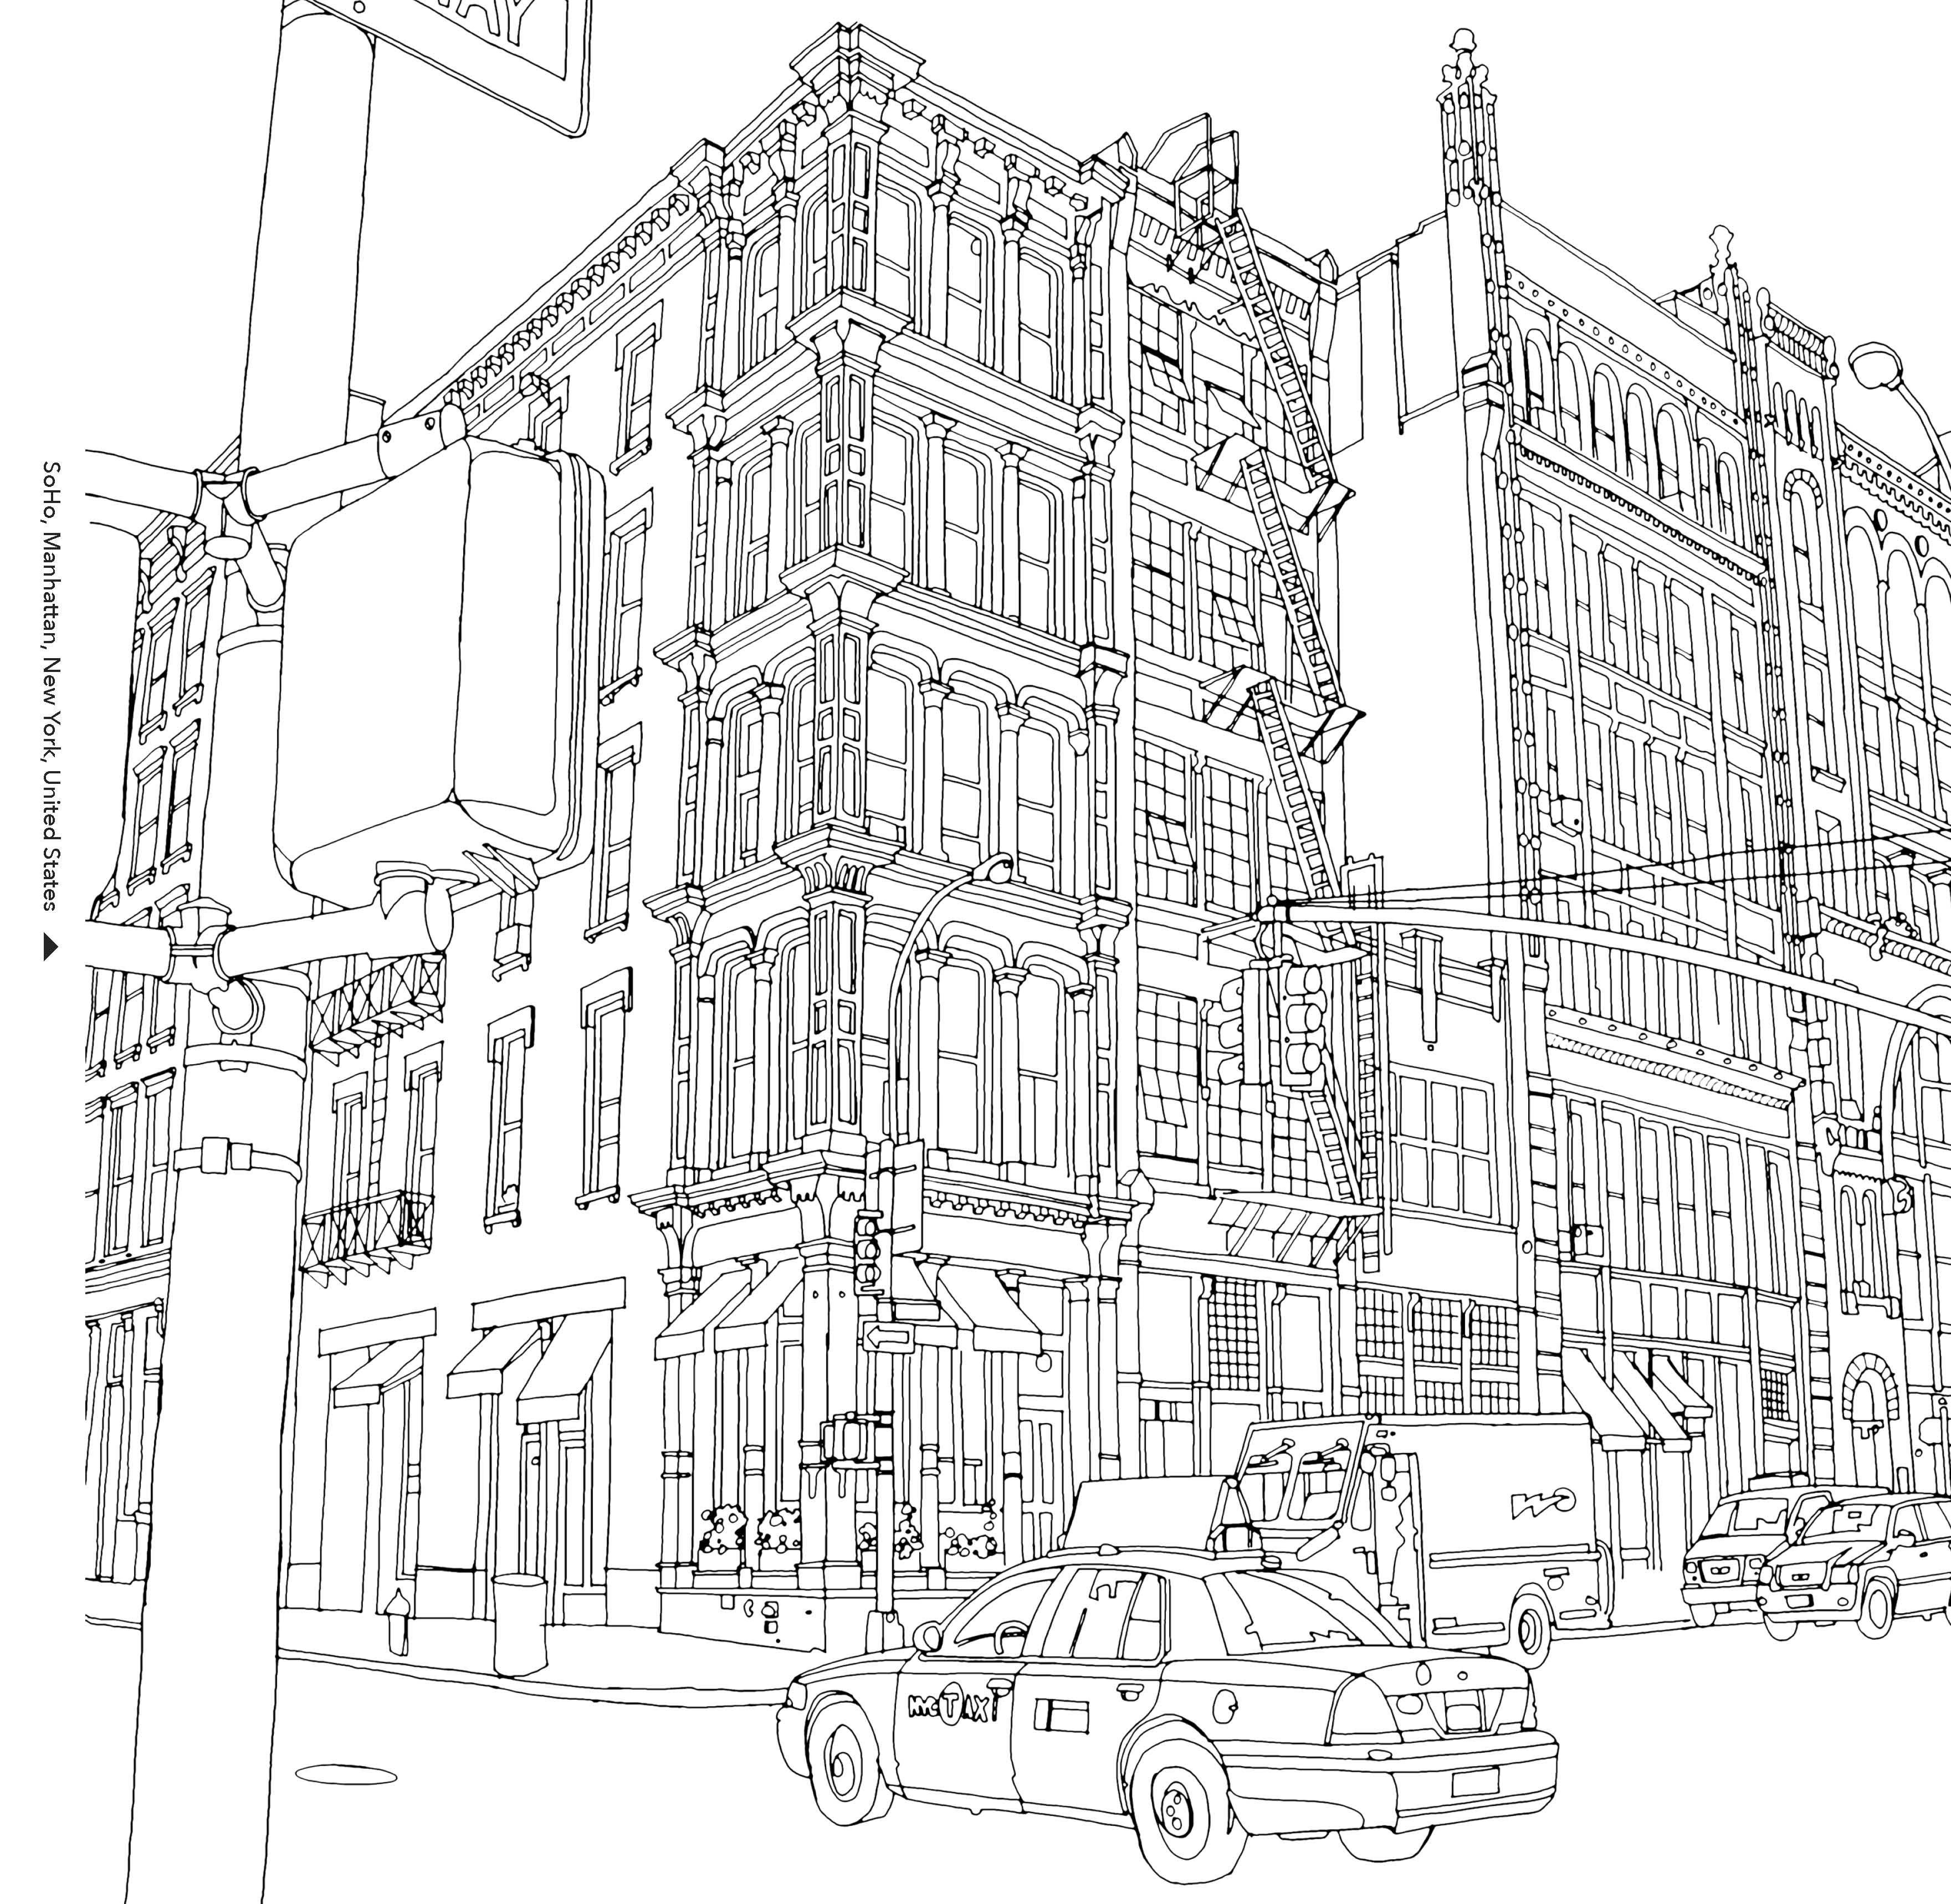 New Coloring Book
 The Surprising Popularity of An Urban Themed Coloring Book